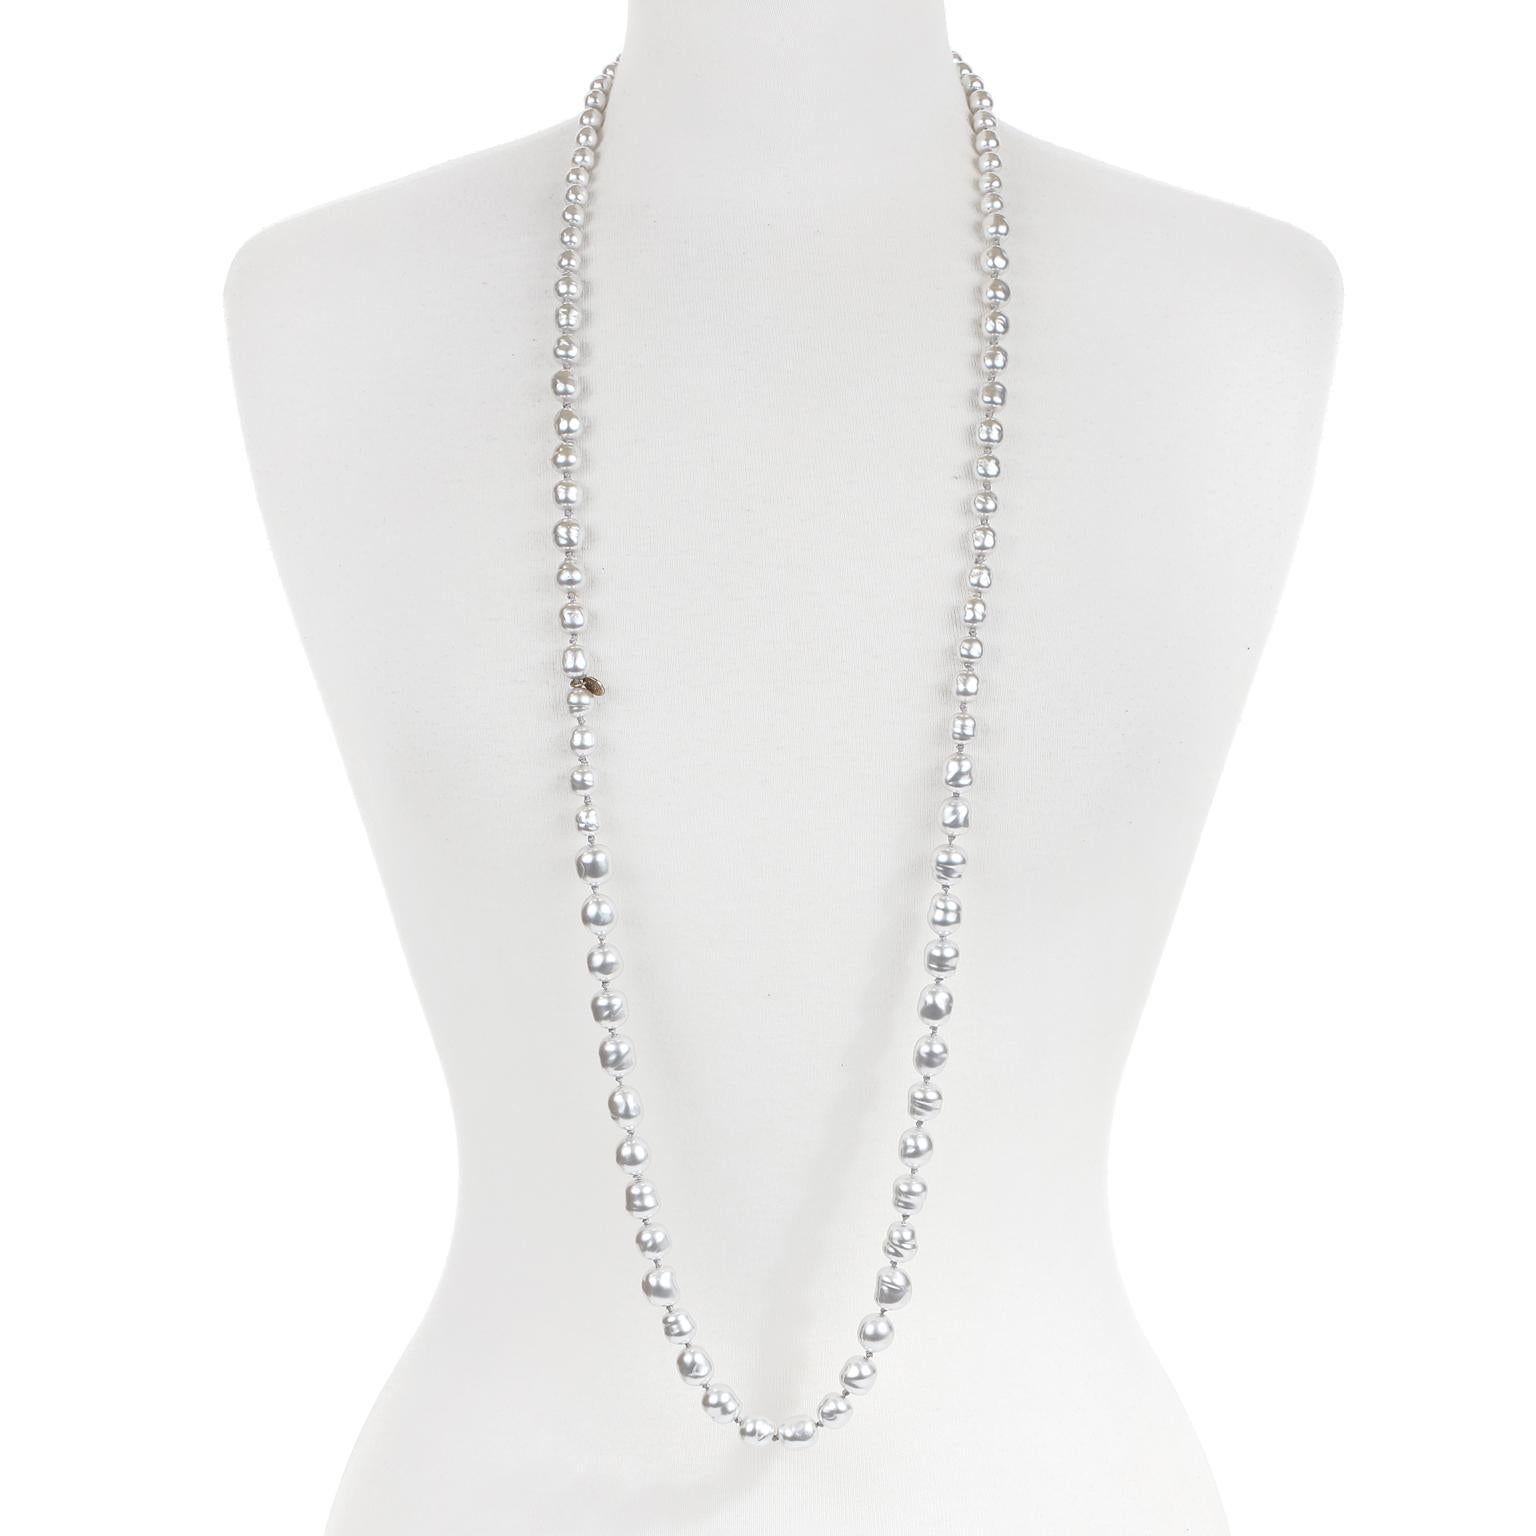 This authentic Chanel Silver Pearl Long Necklace is in excellent vintage condition from the 1981 collection.  Silver faux pearls are knotted together in a long silhouette.  May be worn single or double.  Pouch or box included.
Measurements: 42”
